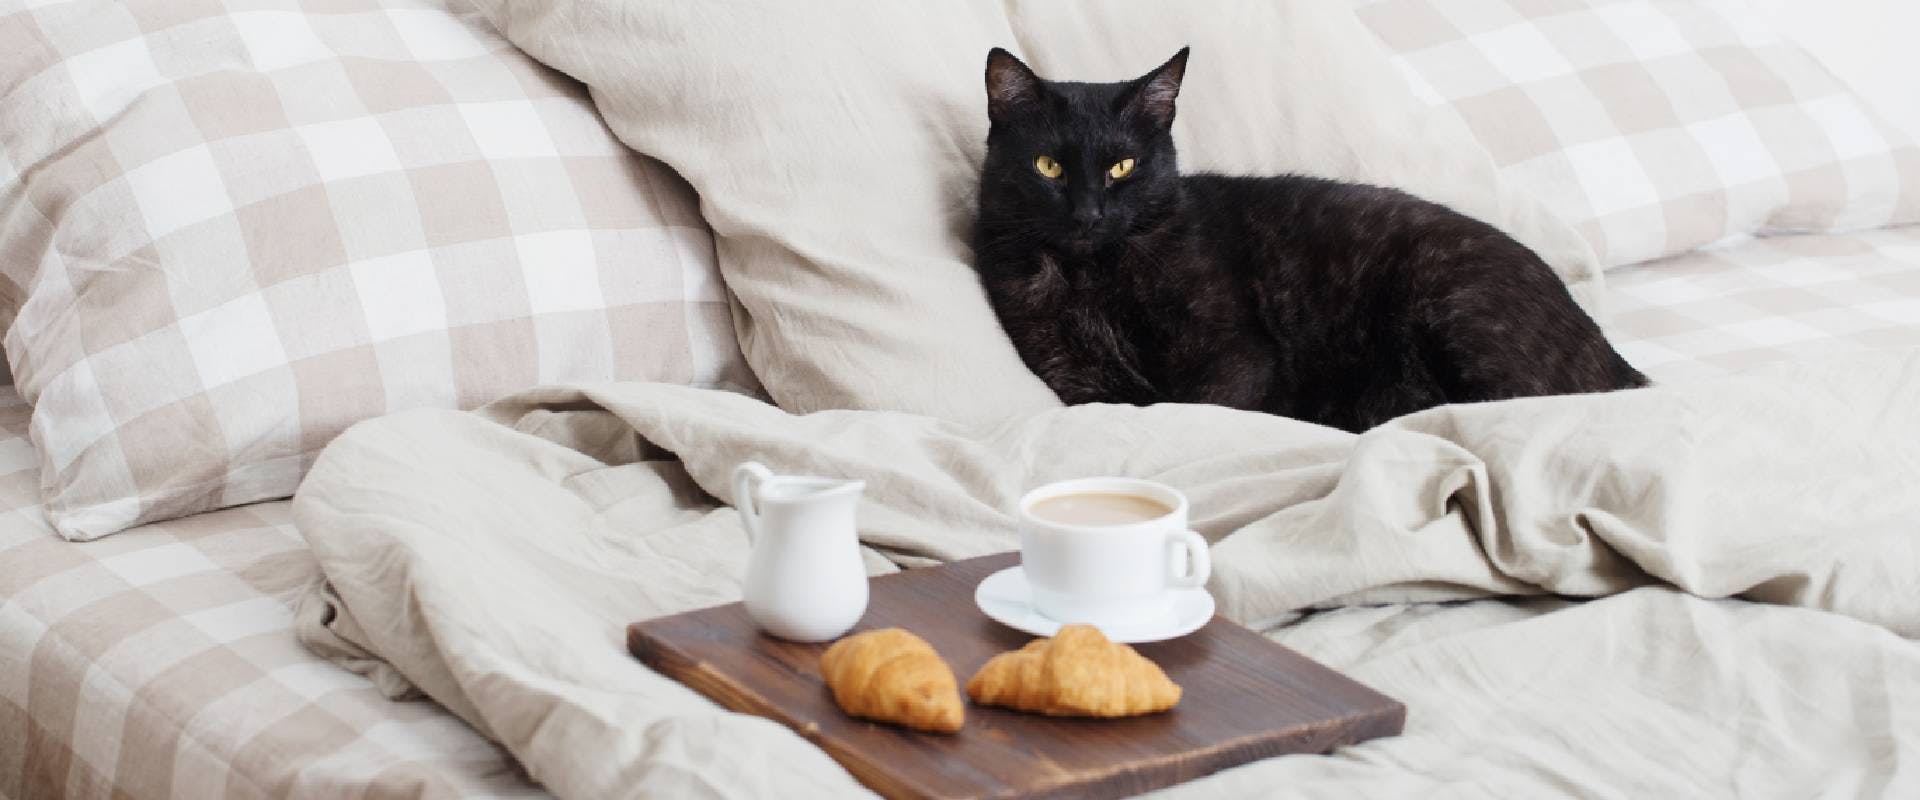 Black cat laying in a bed next to a tray holding coffee and croissants